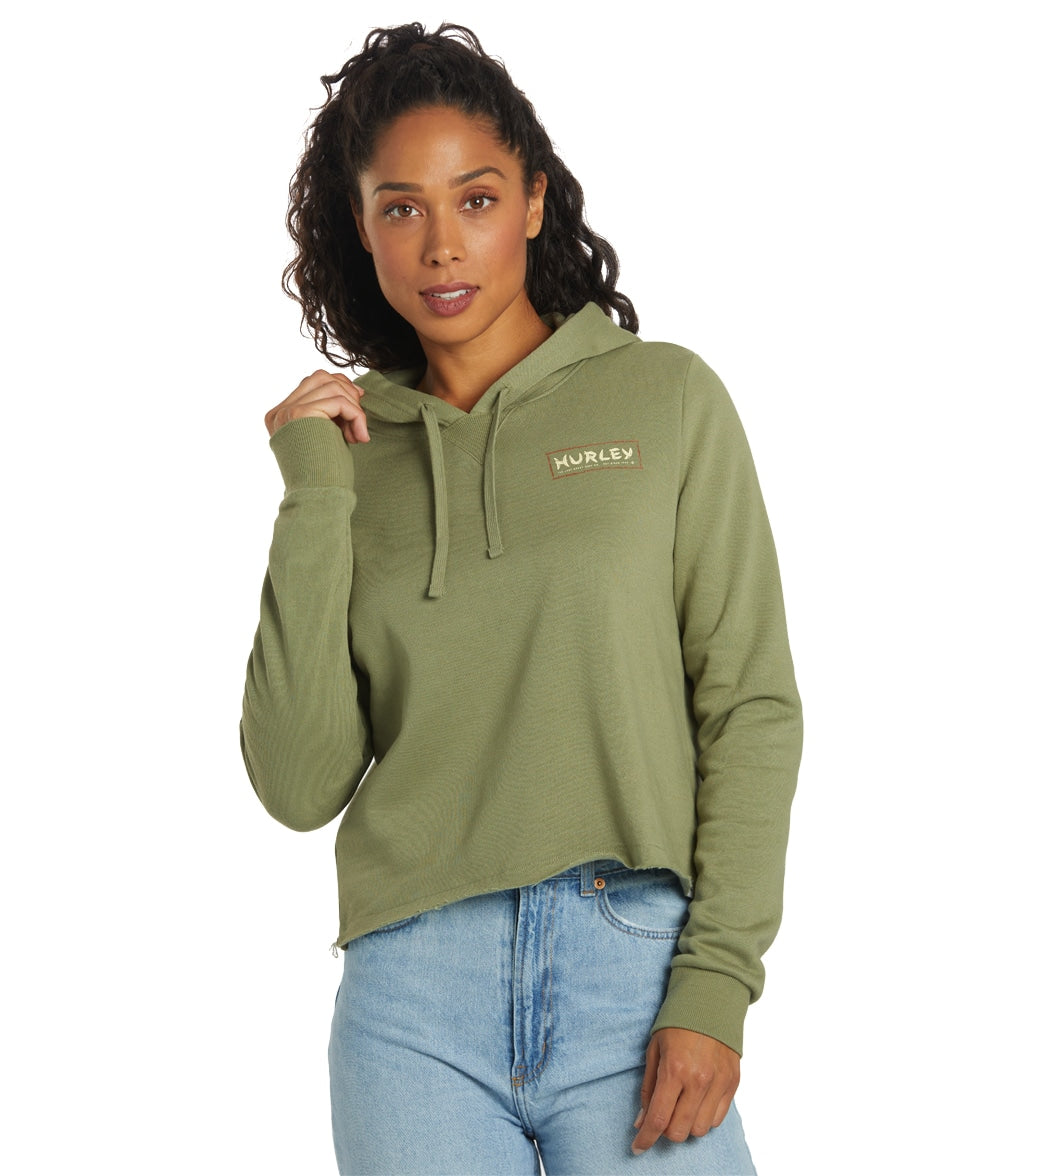 Hurley Women's Death In Paradise Cut Off Pullover Hoodie at SwimOutlet.com